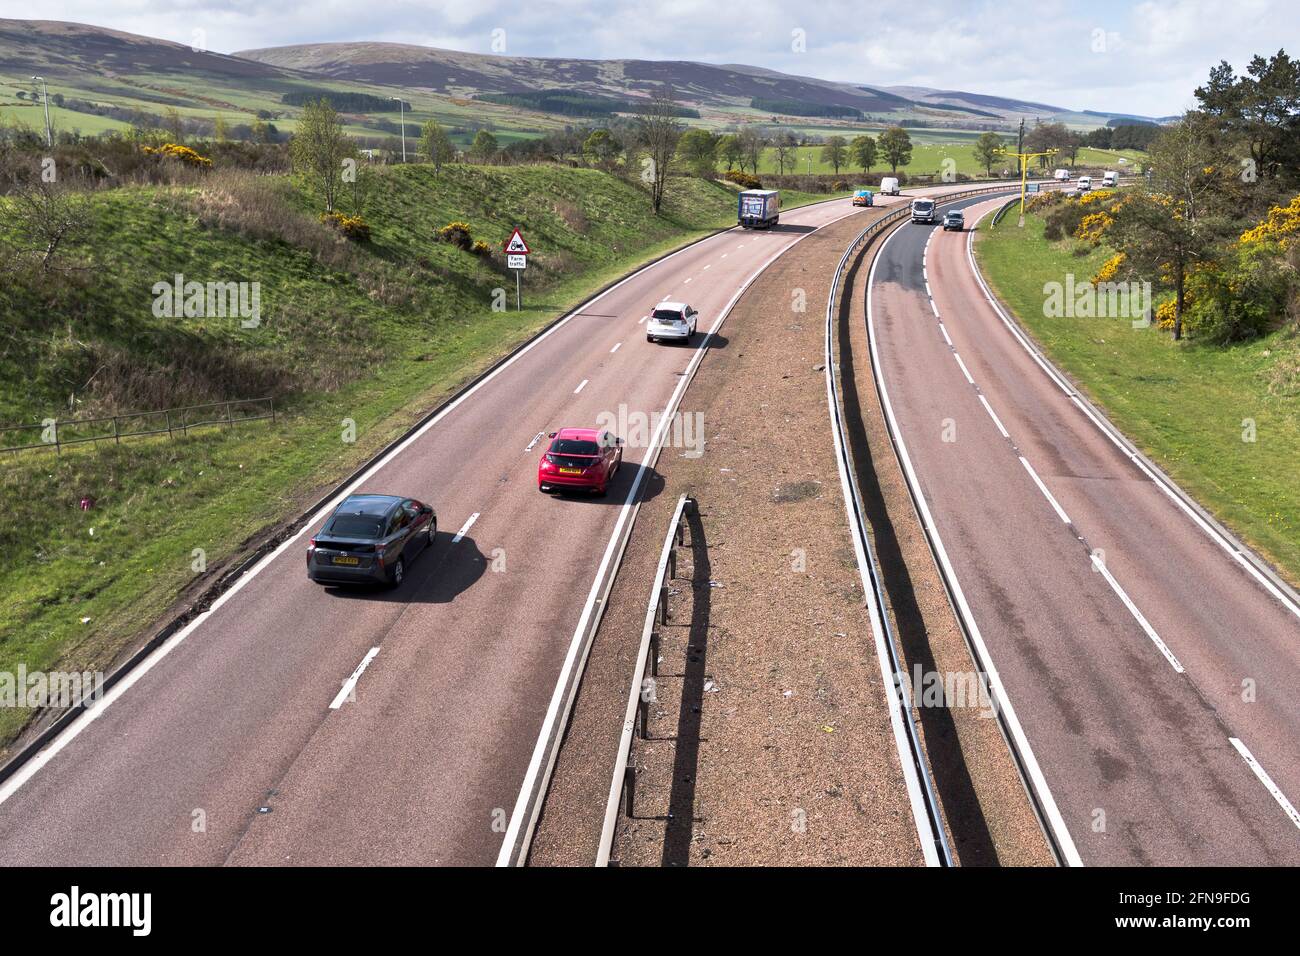 dh A9 PERTHSHIRE Scottish Road Dual Carriage scotland Country car trafic royaume-uni Banque D'Images